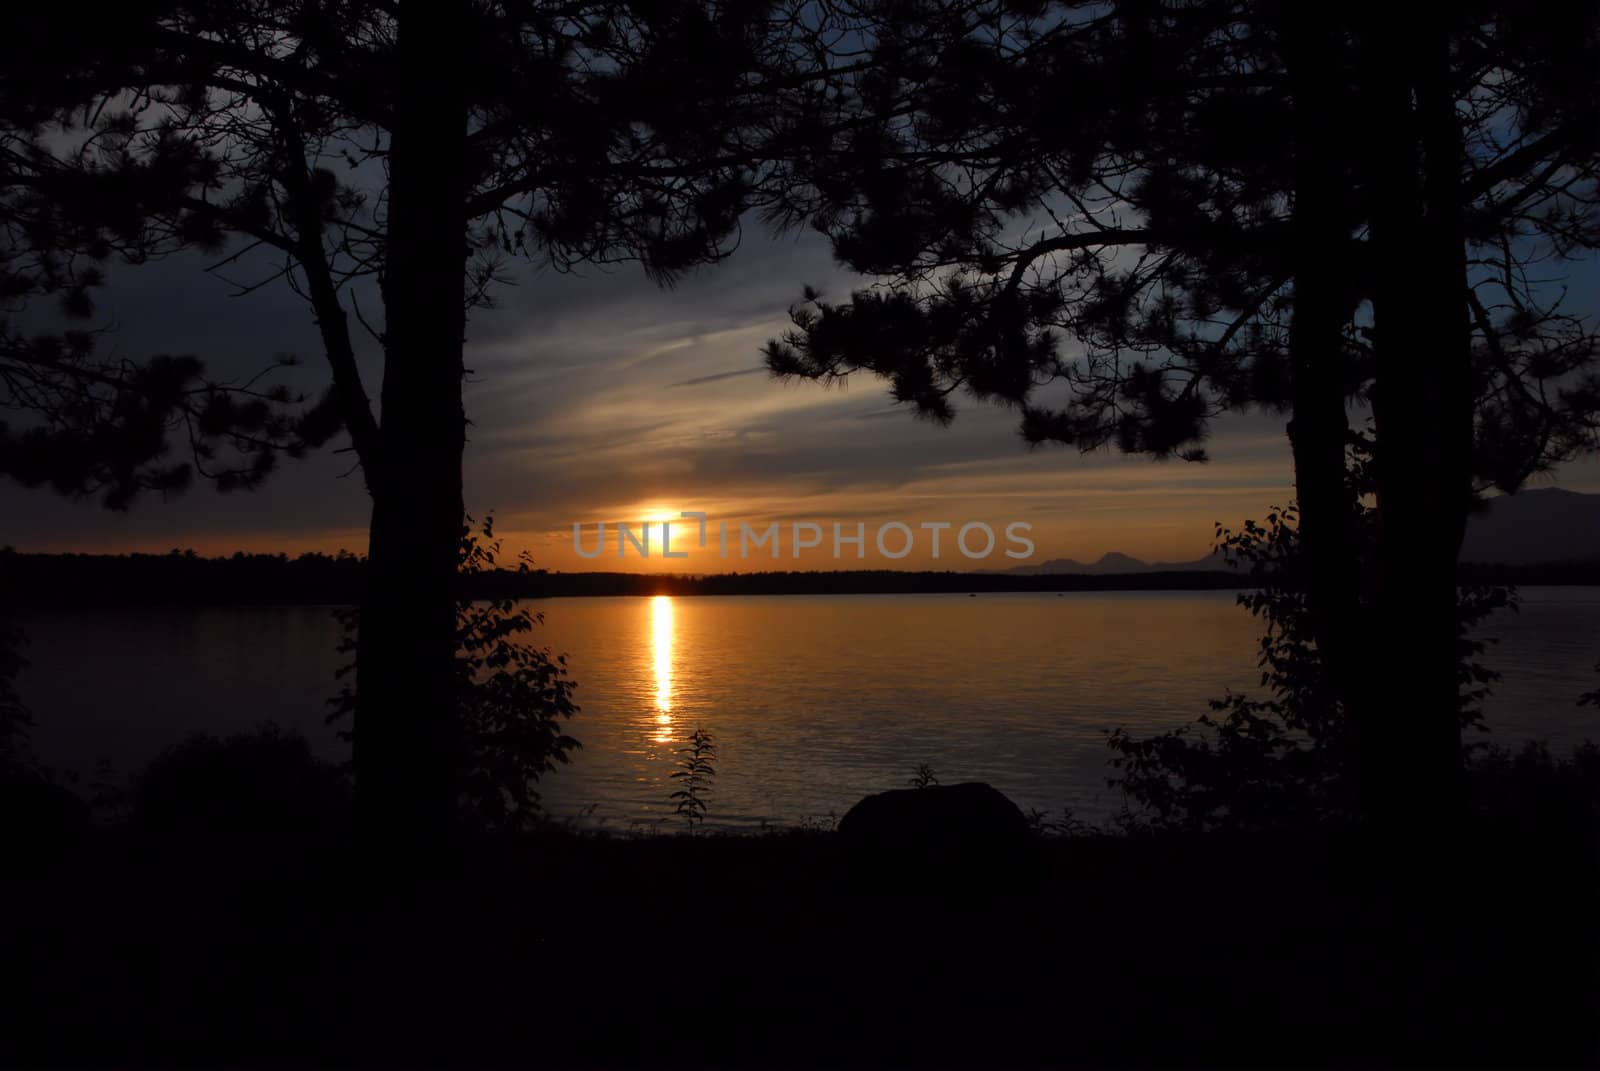 Sunset over Lake Millinocket in Maine. Framed by two trees